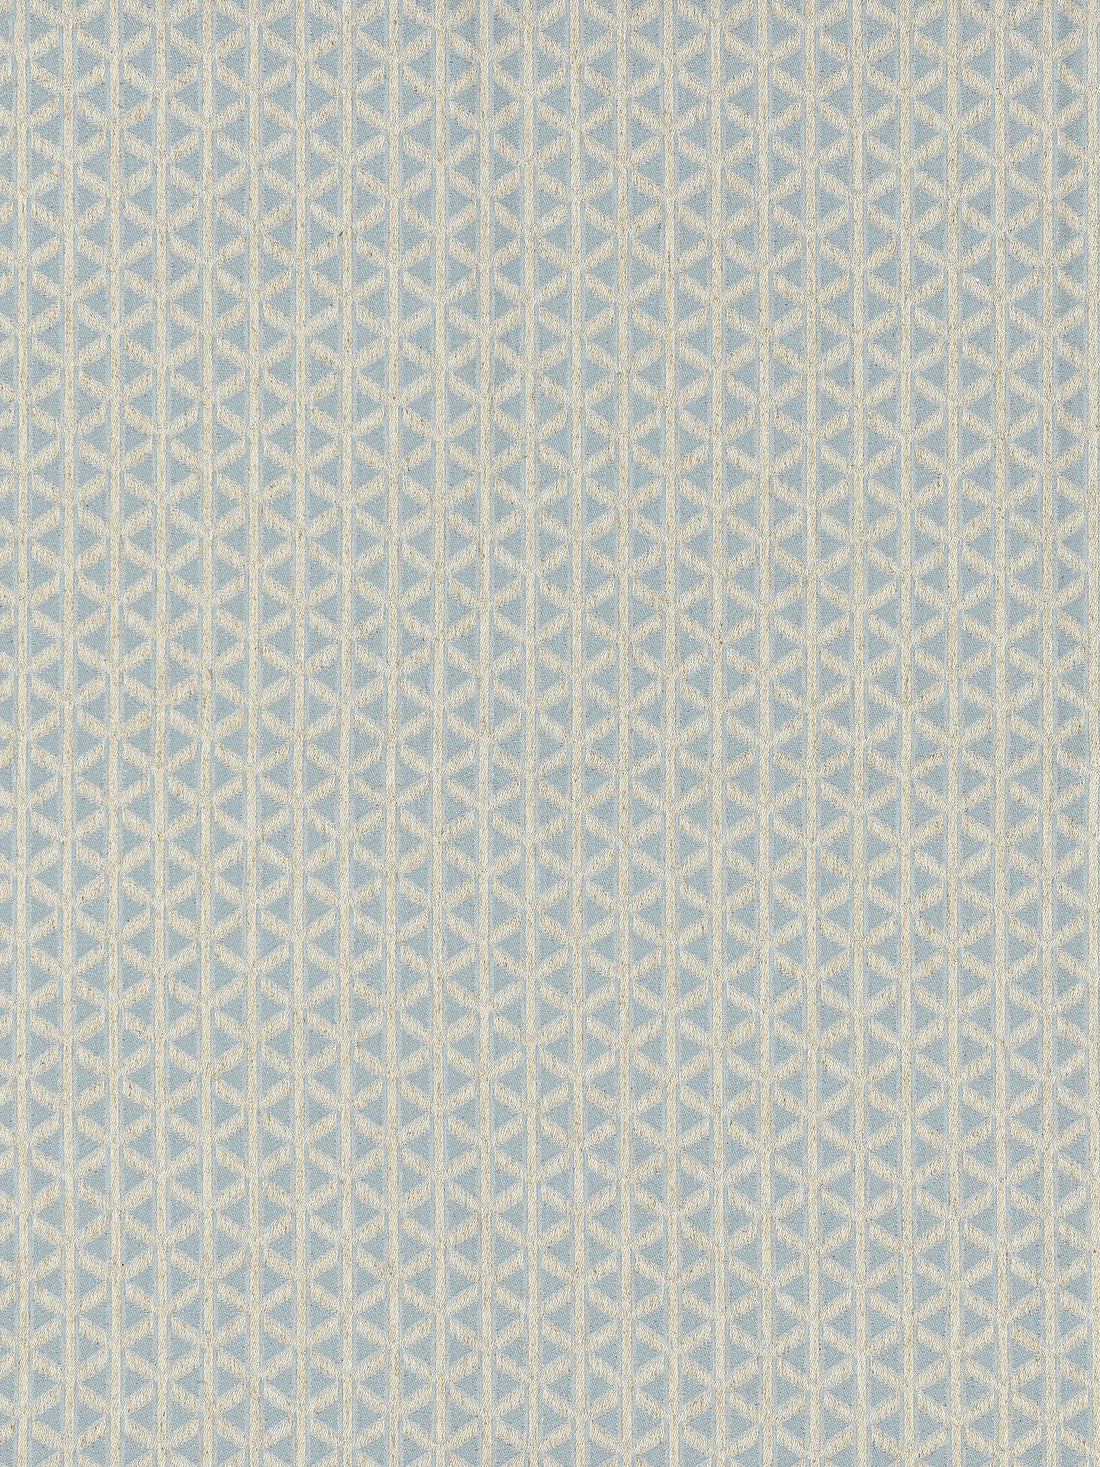 Cross Channel fabric in sky color - pattern number NK 0002CROS - by Scalamandre in the Old World Weavers collection